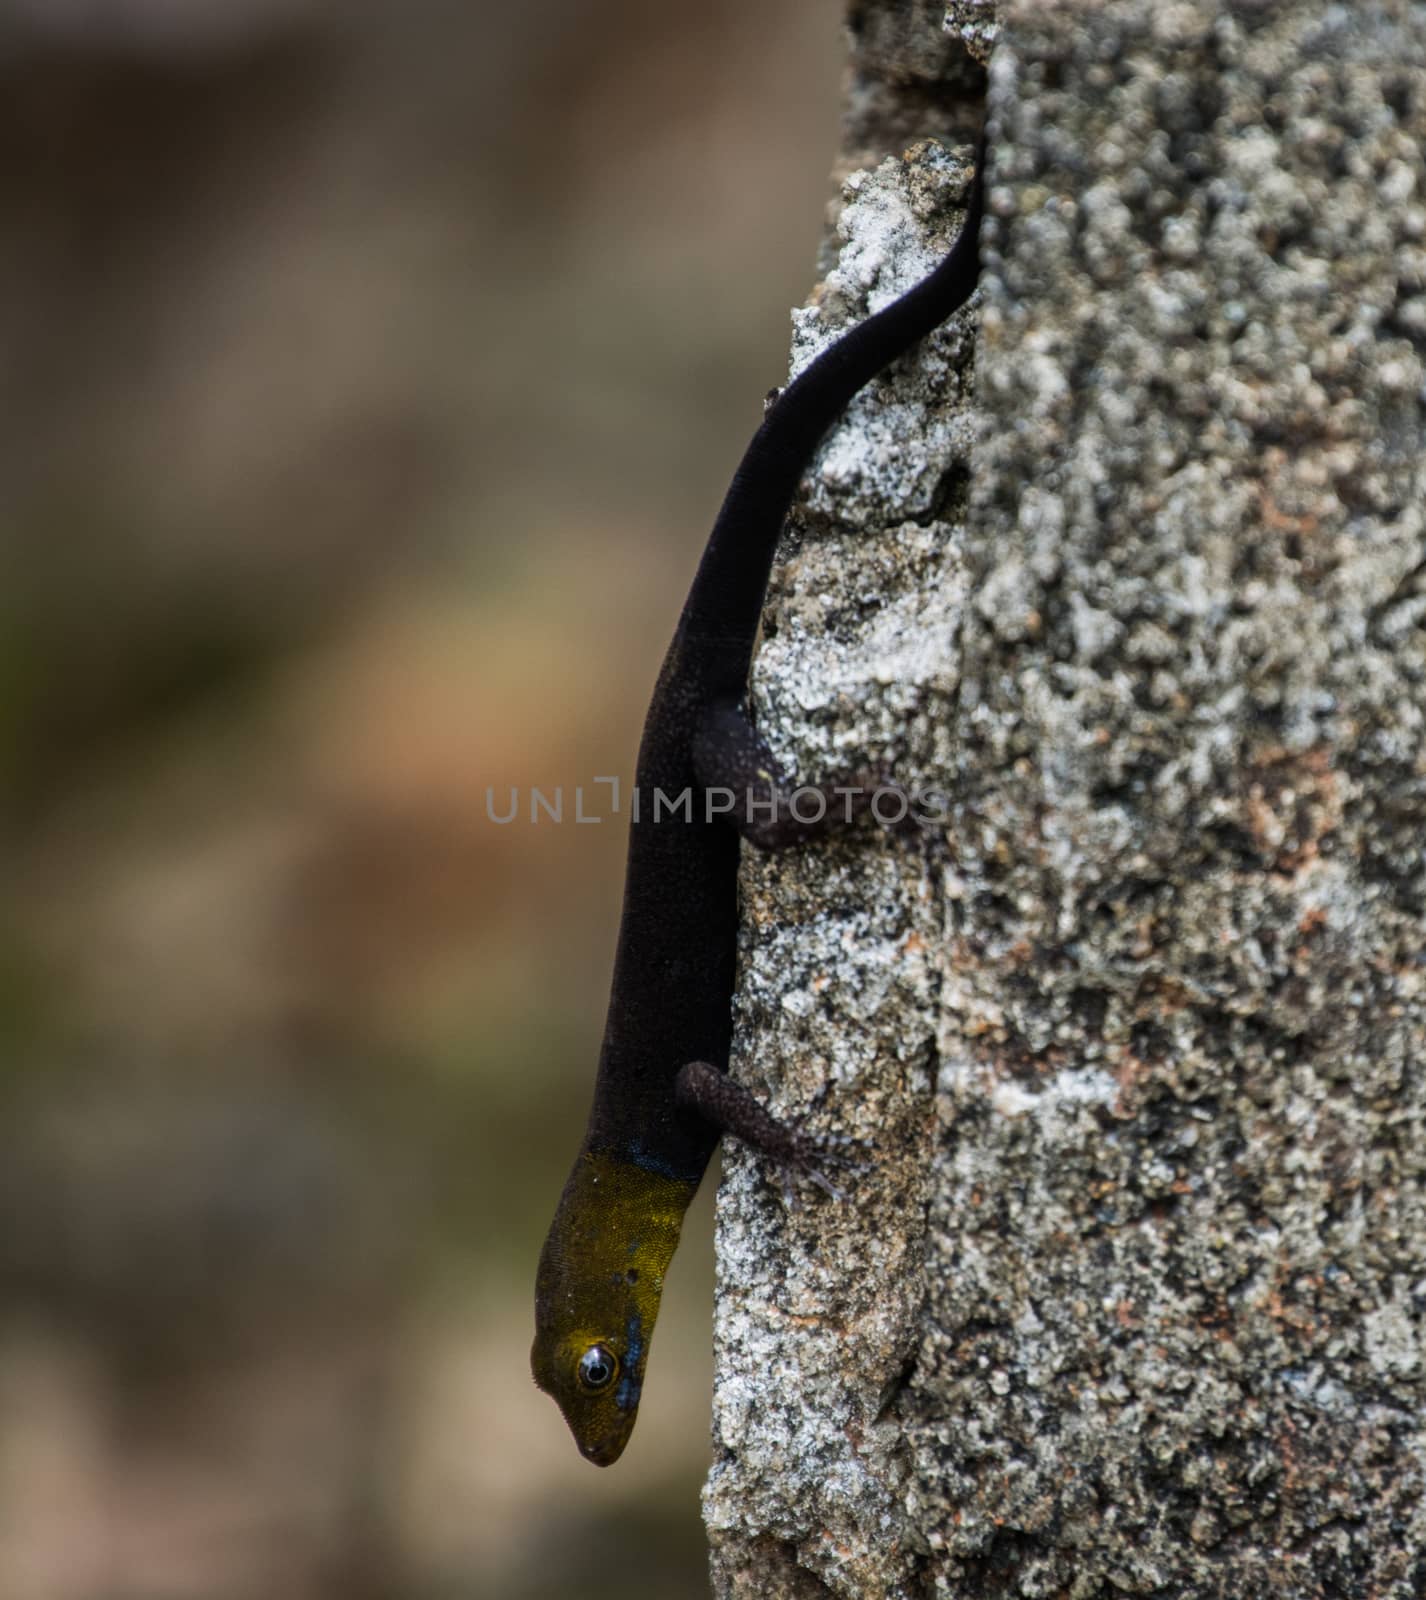 Little lizard with yellow head and black body in a wall by Kinetoscope